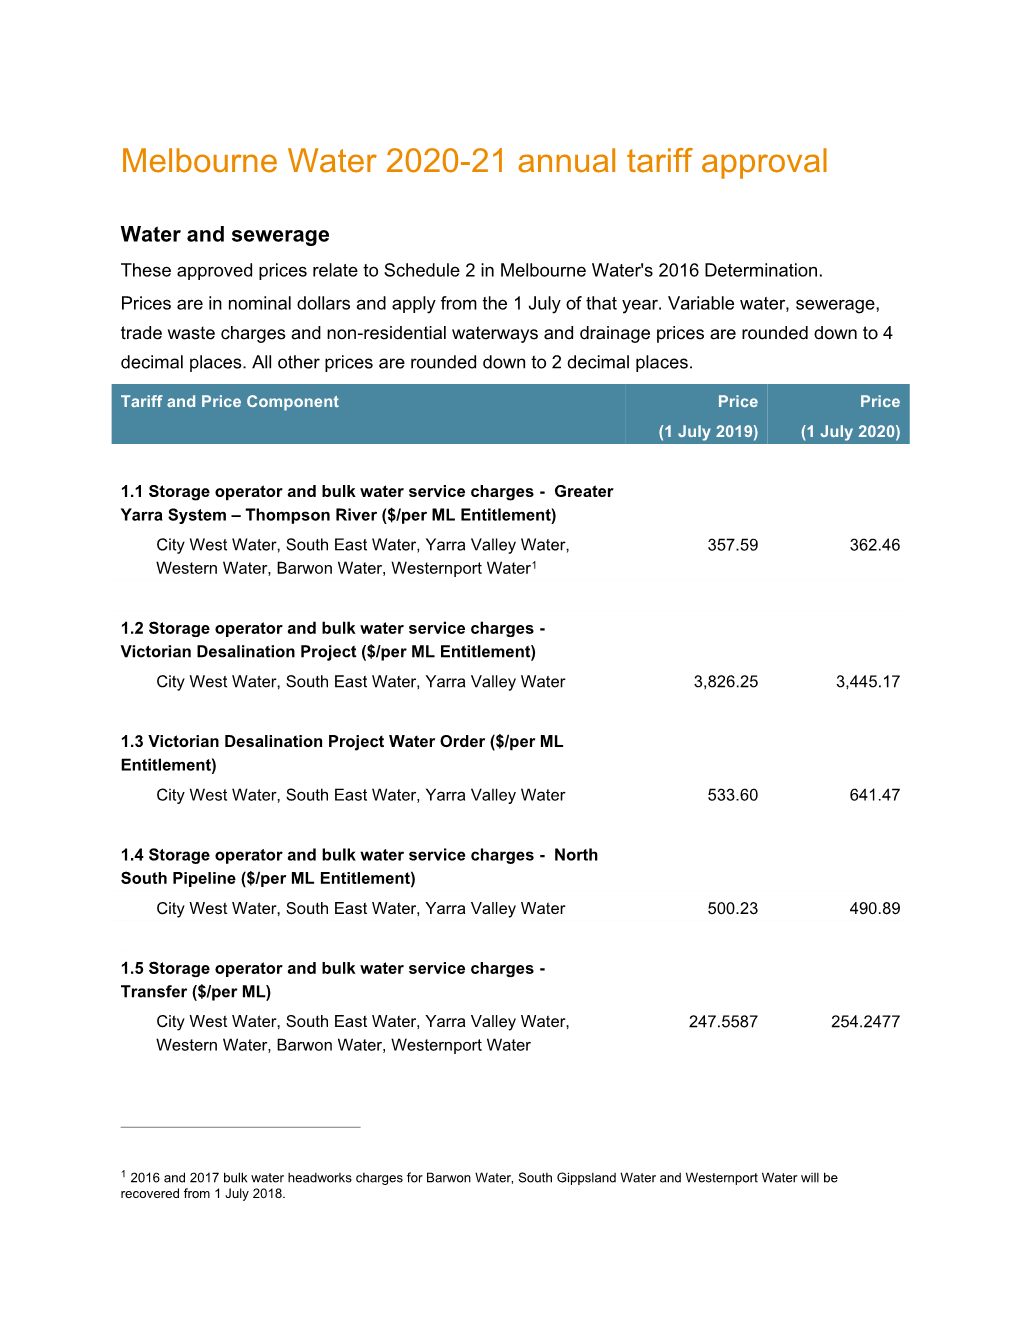 Melbourne Water 2020-21 Annual Tariff Approval